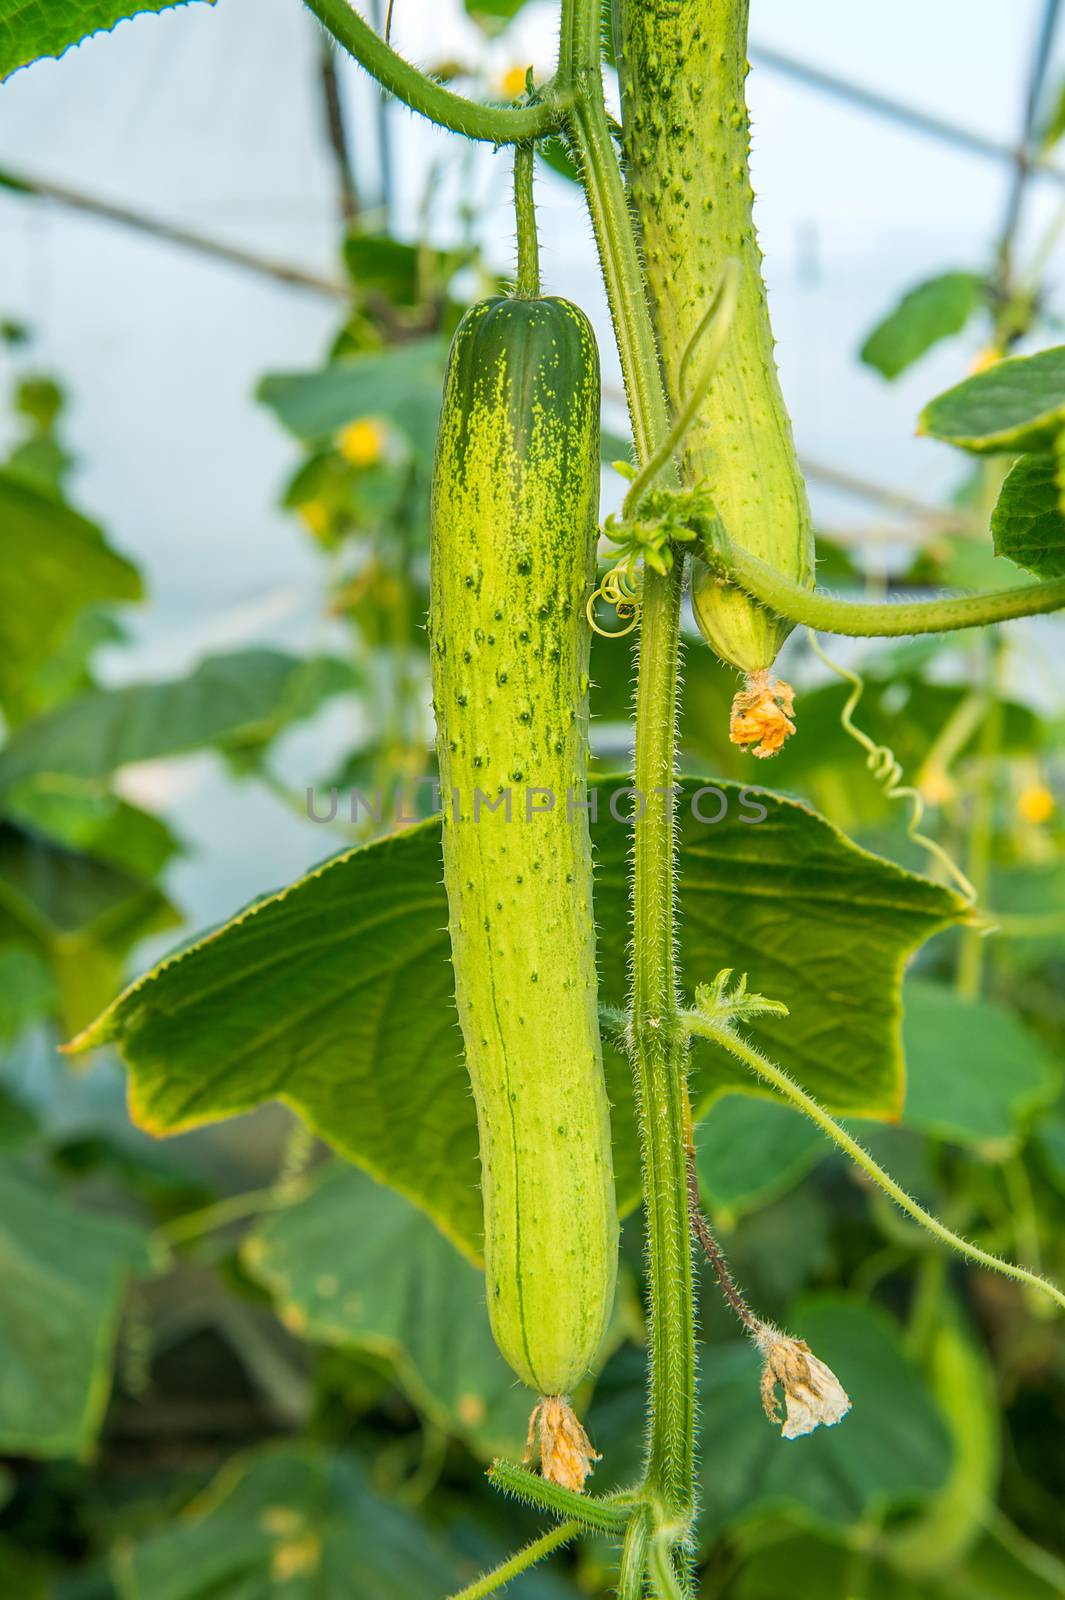 cucumbers in the garden by gutarphotoghaphy